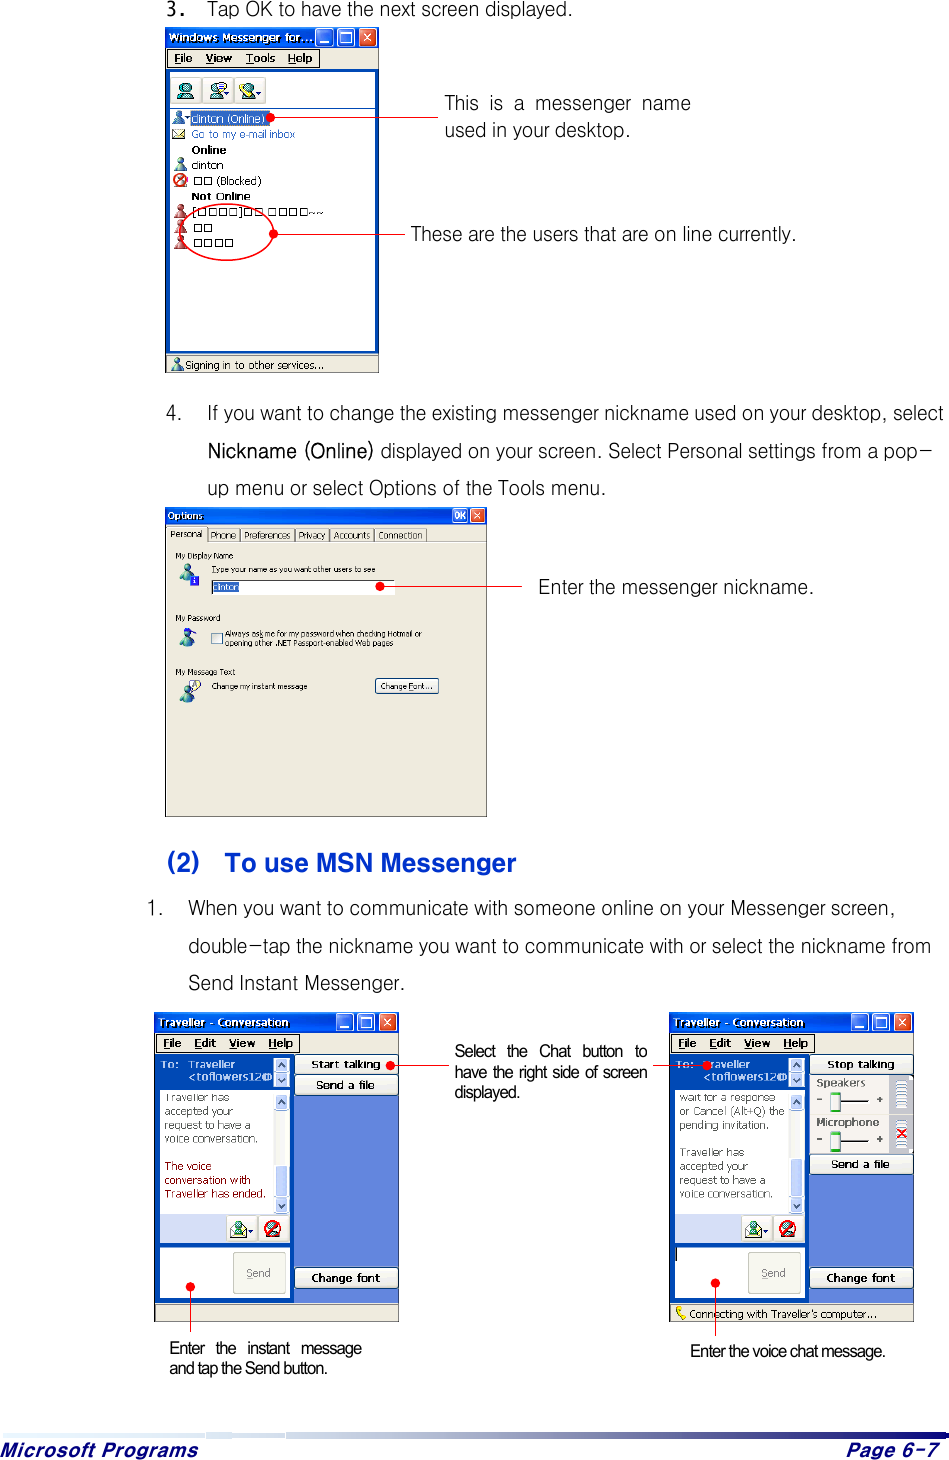 Microsoft Programs    Page 6-7   3. Tap OK to have the next screen displayed.            4.  If you want to change the existing messenger nickname used on your desktop, select Nickname (Online) displayed on your screen. Select Personal settings from a pop-up menu or select Options of the Tools menu.          (2)  To use MSN Messenger 1.  When you want to communicate with someone online on your Messenger screen, double-tap the nickname you want to communicate with or select the nickname from Send Instant Messenger.             Enter the messenger nickname. This  is  a  messenger  nameused in your desktop. These are the users that are on line currently. Select the Chat button to have the right side of screen displayed. Enter the instant messageand tap the Send button. Enter the voice chat message.